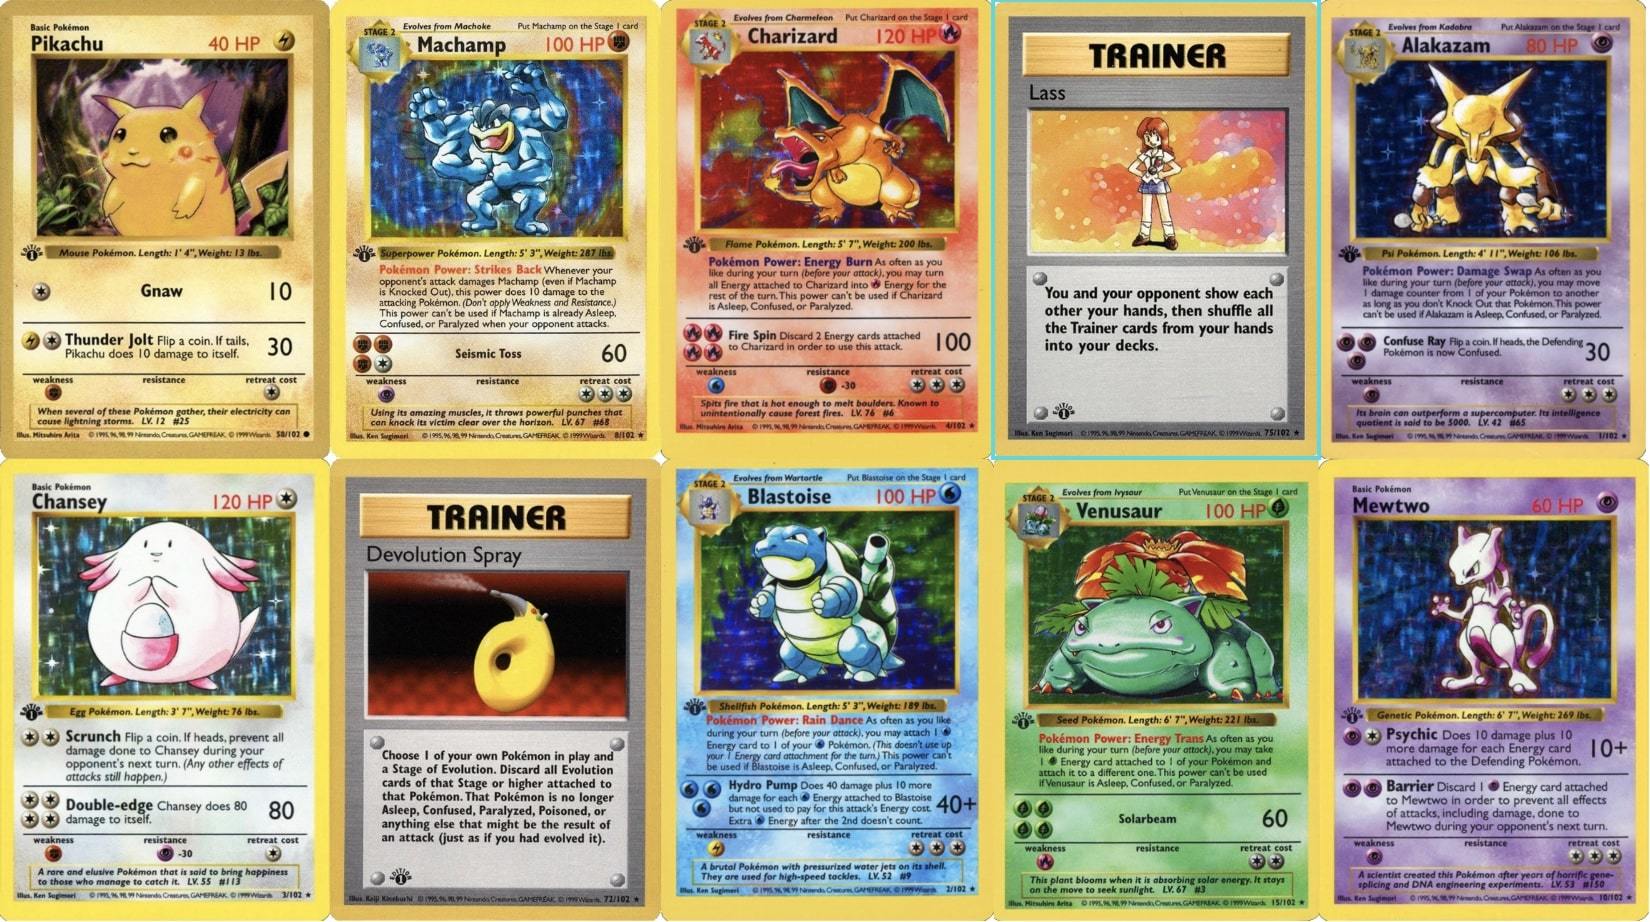 25 Most Valuable First Edition Pokemon Cards Old Sports Cards